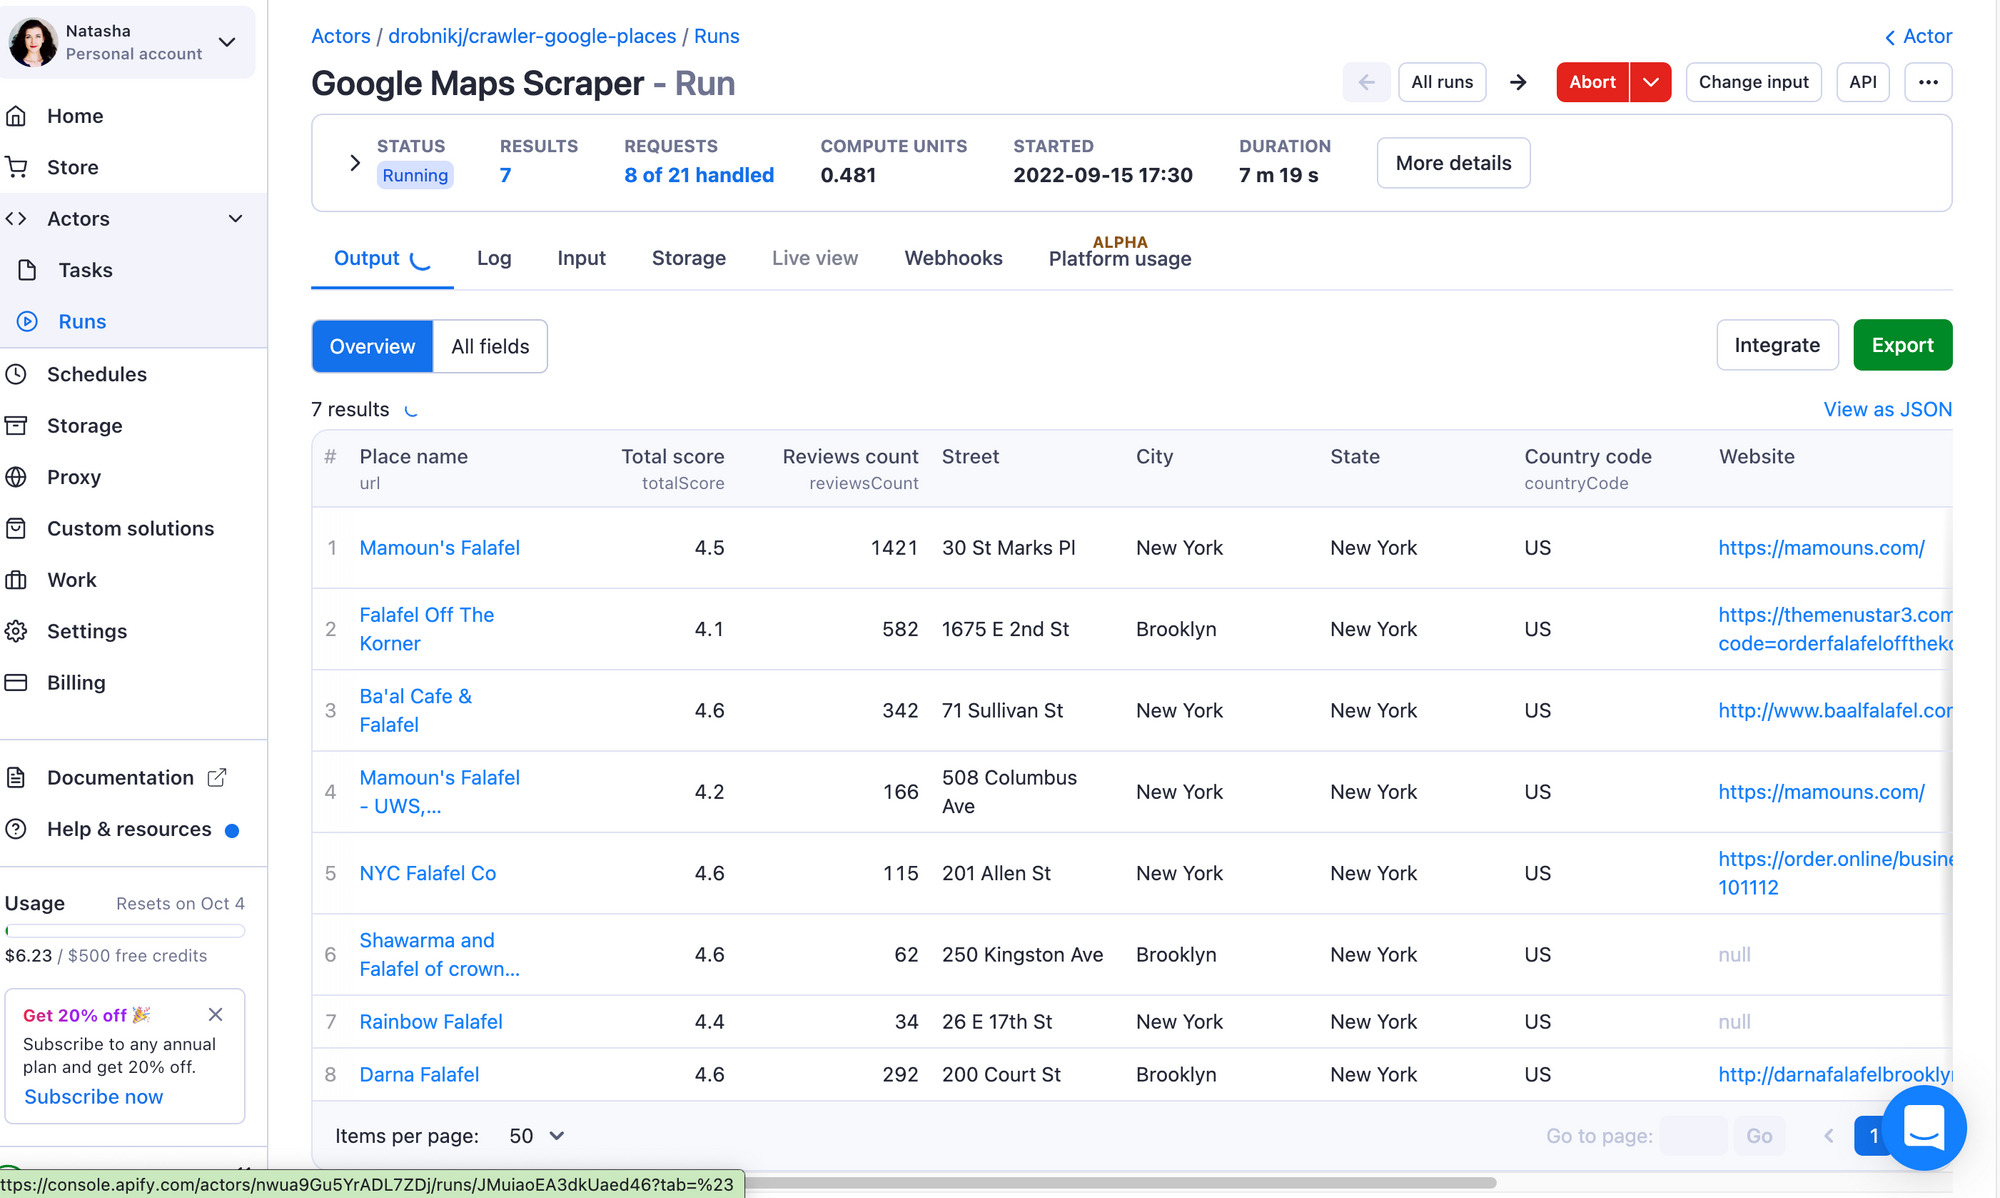 Start Google Maps Scraper and wait till the status turns to Succeeded